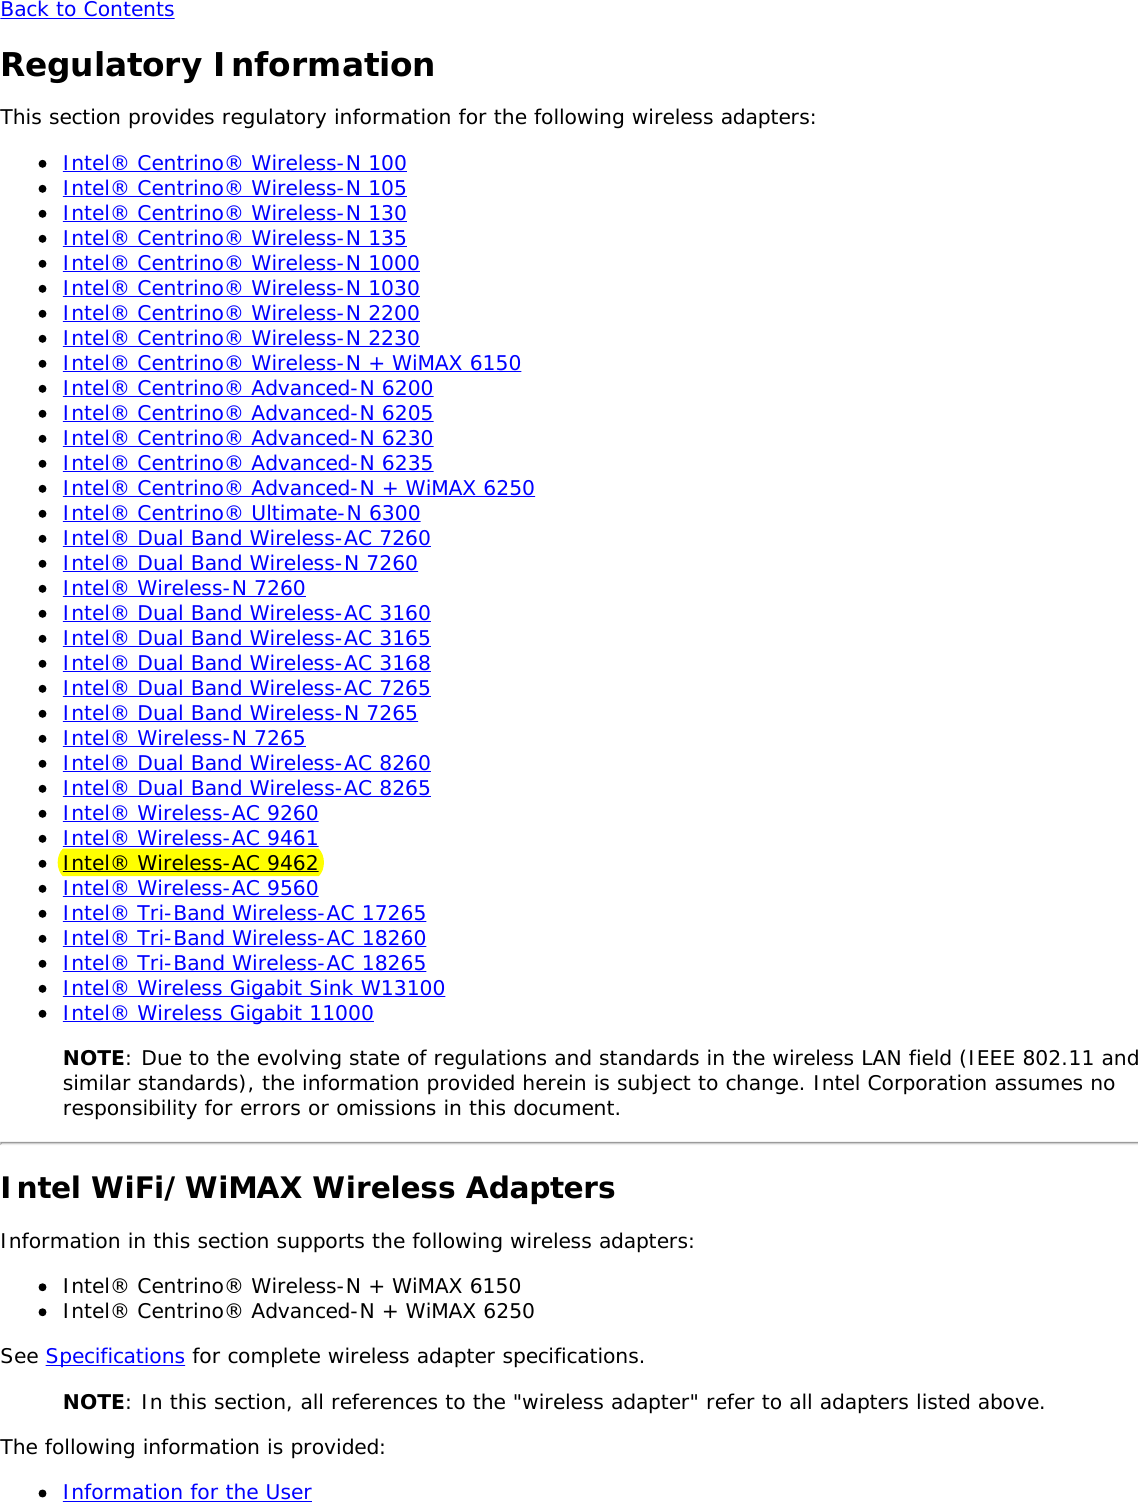 Back to ContentsRegulatory InformationThis section provides regulatory information for the following wireless adapters:Intel® Centrino® Wireless-N 100Intel® Centrino® Wireless-N 105Intel® Centrino® Wireless-N 130Intel® Centrino® Wireless-N 135Intel® Centrino® Wireless-N 1000Intel® Centrino® Wireless-N 1030Intel® Centrino® Wireless-N 2200Intel® Centrino® Wireless-N 2230Intel® Centrino® Wireless-N + WiMAX 6150Intel® Centrino® Advanced-N 6200Intel® Centrino® Advanced-N 6205Intel® Centrino® Advanced-N 6230Intel® Centrino® Advanced-N 6235Intel® Centrino® Advanced-N + WiMAX 6250Intel® Centrino® Ultimate-N 6300Intel® Dual Band Wireless-AC 7260Intel® Dual Band Wireless-N 7260Intel® Wireless-N 7260Intel® Dual Band Wireless-AC 3160Intel® Dual Band Wireless-AC 3165Intel® Dual Band Wireless-AC 3168Intel® Dual Band Wireless-AC 7265Intel® Dual Band Wireless-N 7265Intel® Wireless-N 7265Intel® Dual Band Wireless-AC 8260Intel® Dual Band Wireless-AC 8265Intel® Wireless-AC 9260Intel® Wireless-AC 9461Intel® Wireless-AC 9462Intel® Wireless-AC 9560Intel® Tri-Band Wireless-AC 17265Intel® Tri-Band Wireless-AC 18260Intel® Tri-Band Wireless-AC 18265Intel® Wireless Gigabit Sink W13100Intel® Wireless Gigabit 11000NOTE: Due to the evolving state of regulations and standards in the wireless LAN field (IEEE 802.11 andsimilar standards), the information provided herein is subject to change. Intel Corporation assumes noresponsibility for errors or omissions in this document.Intel WiFi/WiMAX Wireless AdaptersInformation in this section supports the following wireless adapters:Intel® Centrino® Wireless-N + WiMAX 6150Intel® Centrino® Advanced-N + WiMAX 6250See Specifications for complete wireless adapter specifications.NOTE: In this section, all references to the &quot;wireless adapter&quot; refer to all adapters listed above.The following information is provided:Information for the User